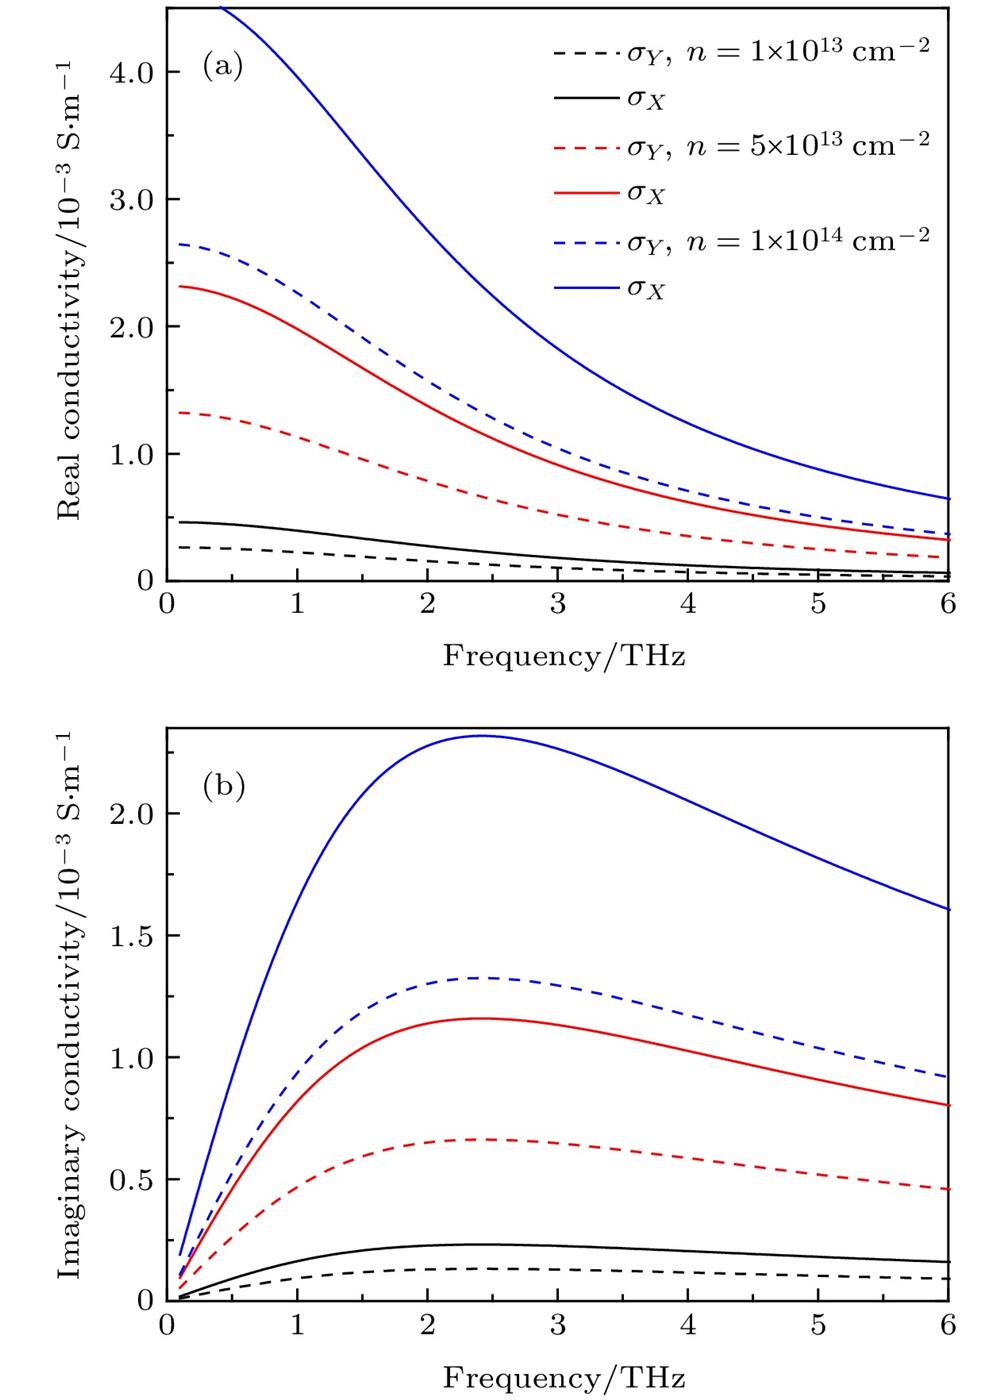 Conductivity dispersion curve for two-dimensional BP: (a) The real part of the conductivity; (b) the imaginary part of the conductivity.